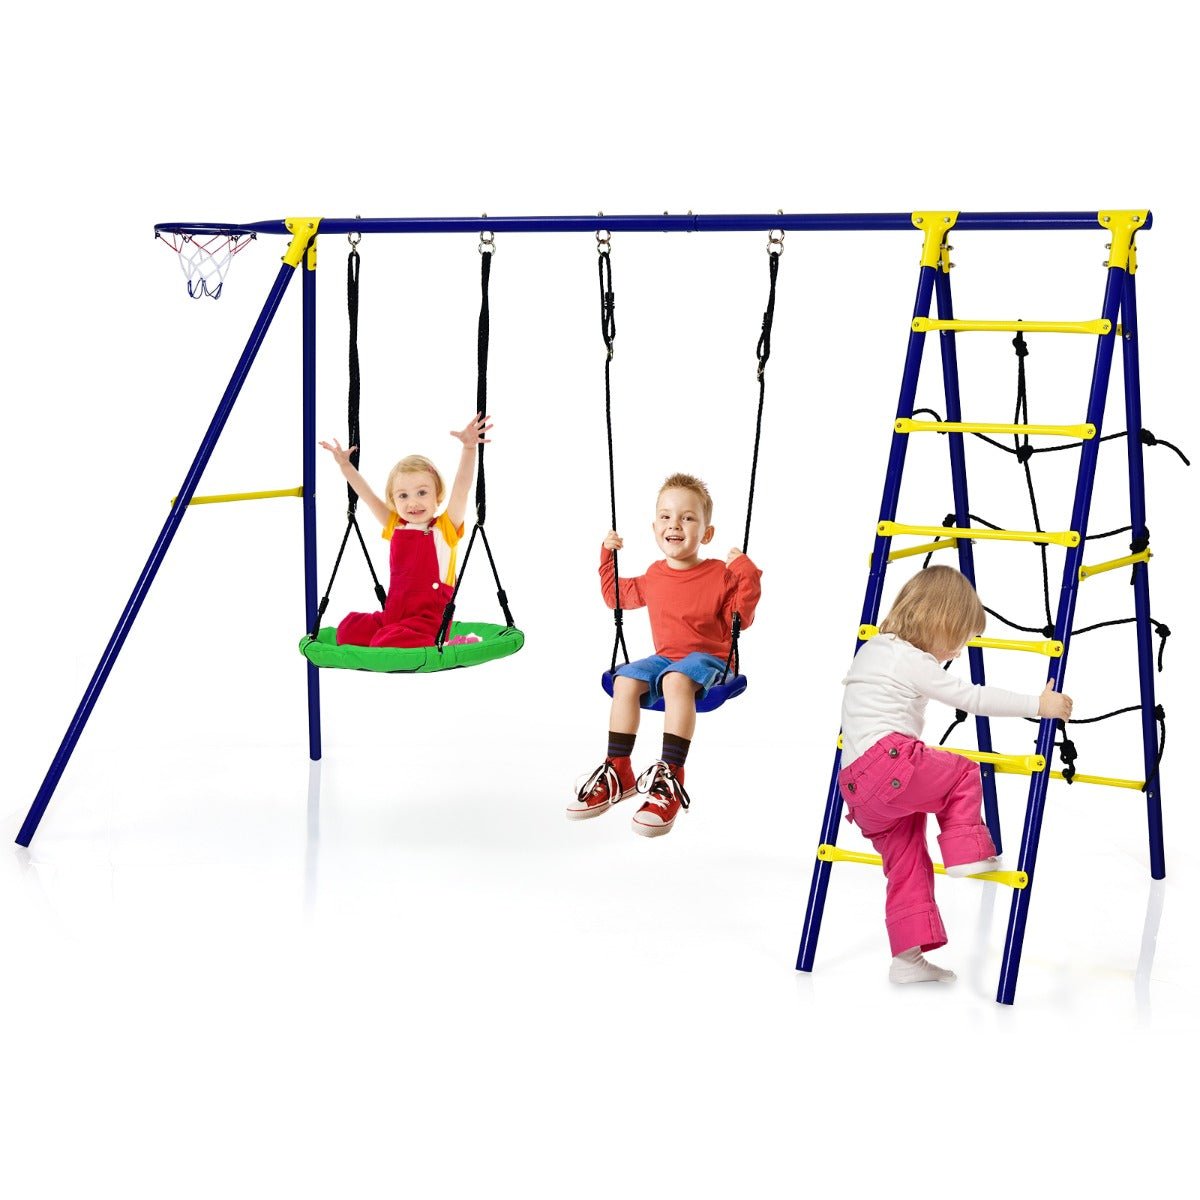 Outdoor Playtime Joy: 5-in-1 Kids Swing Set with A-Shaped Metal Frame